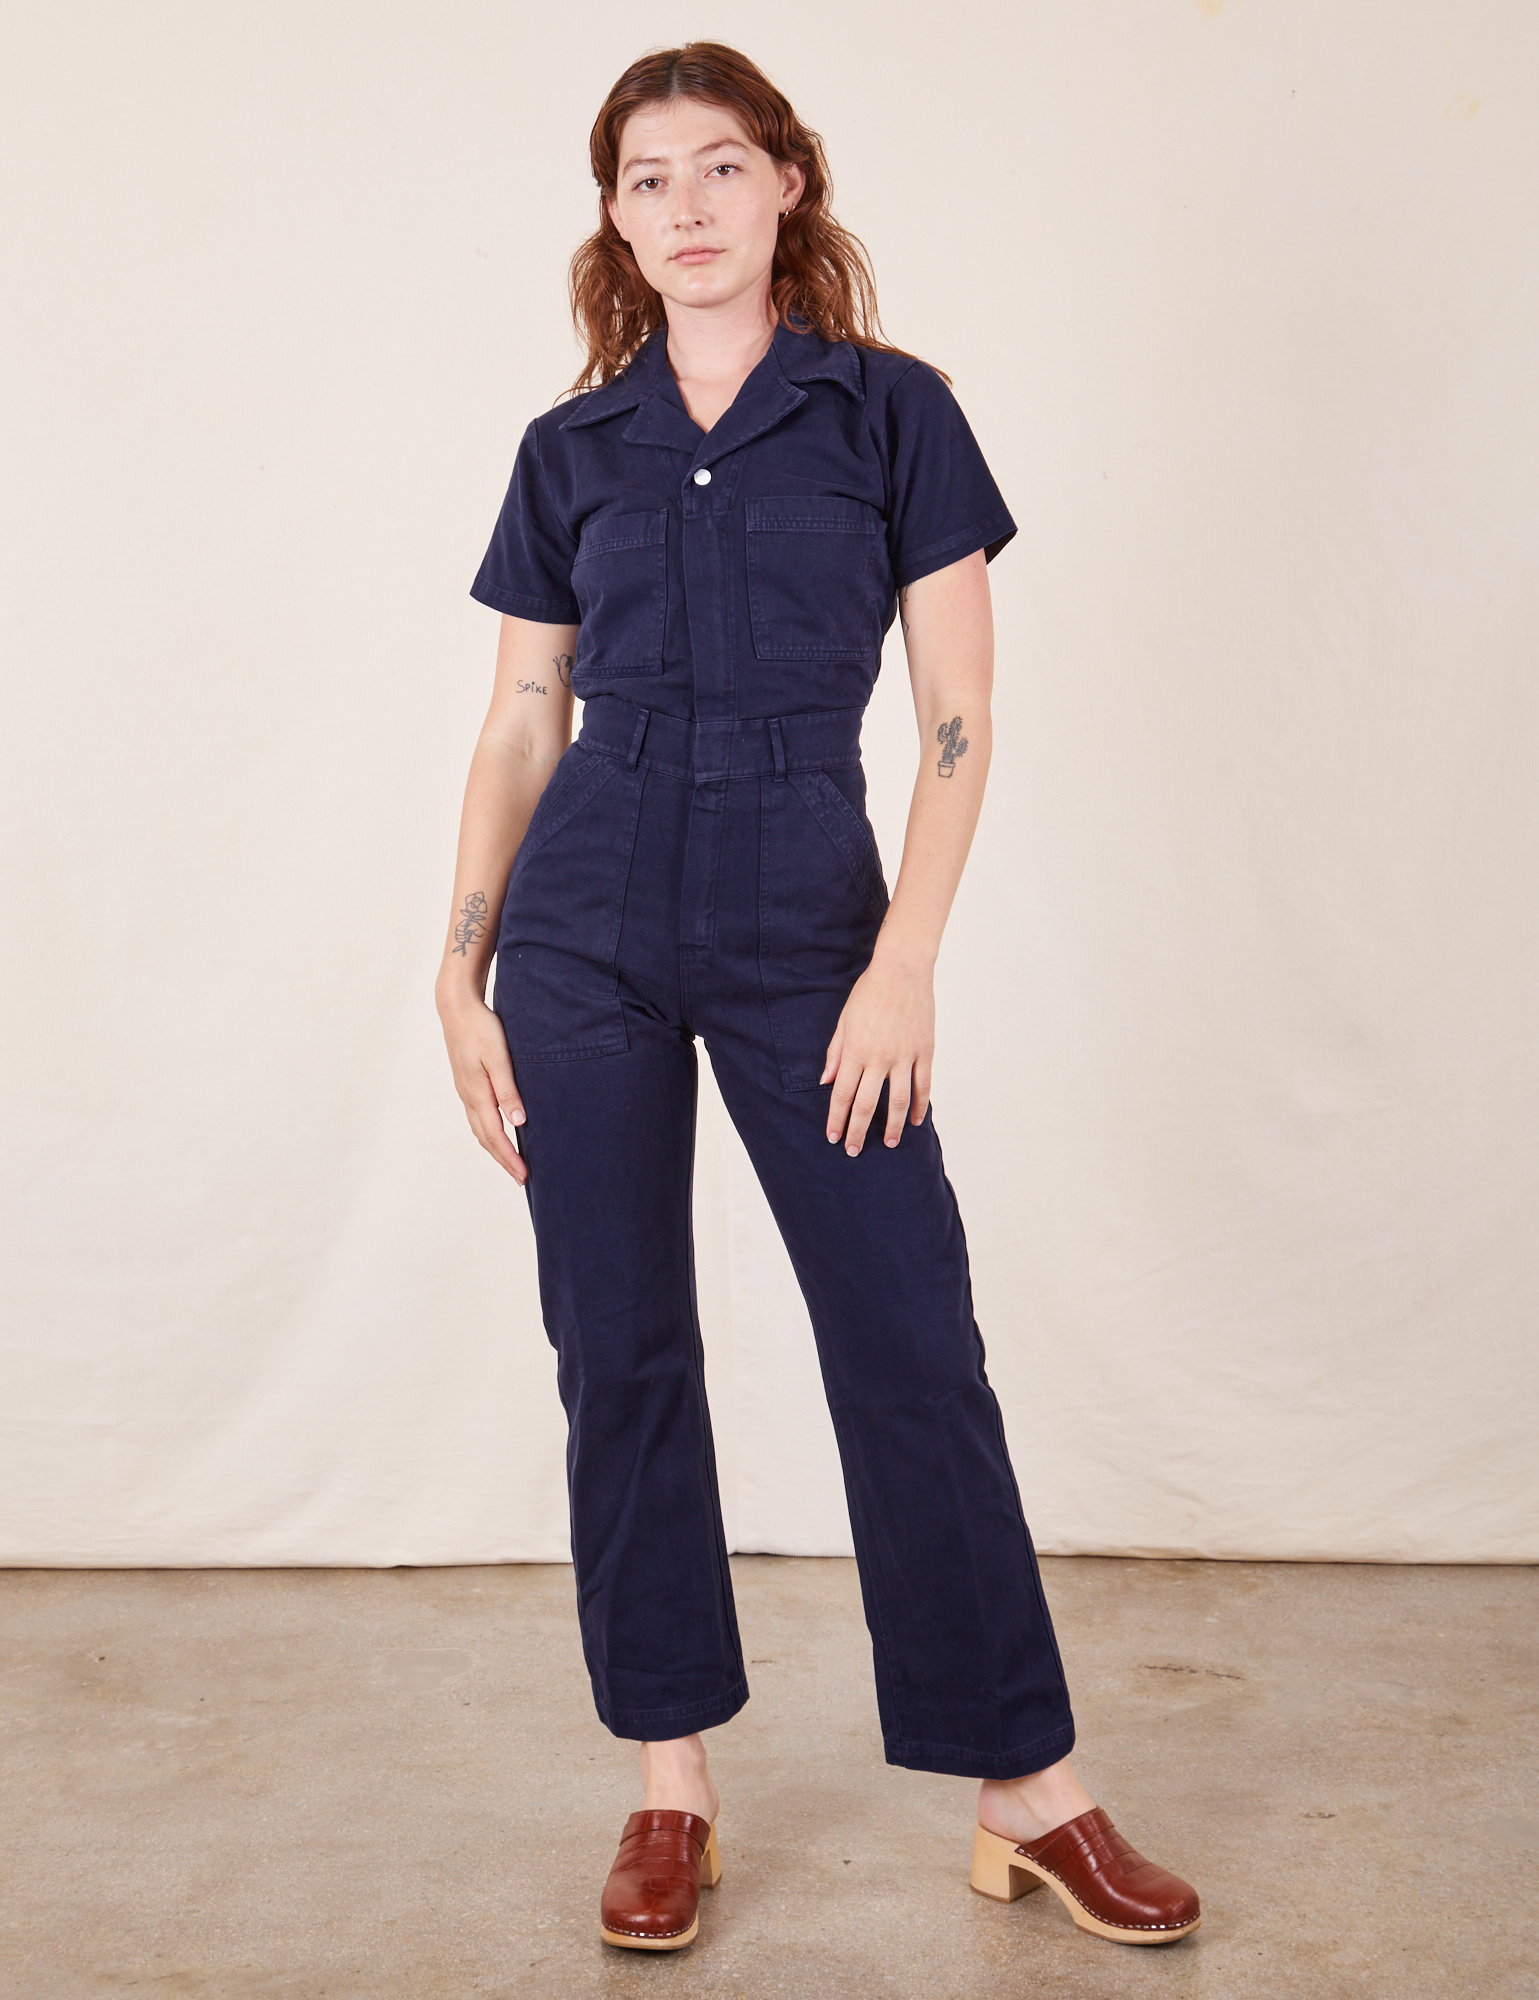 Alex is 5&#39;8&quot; and wearing XS Short Sleeve Jumpsuit in Navy Blue